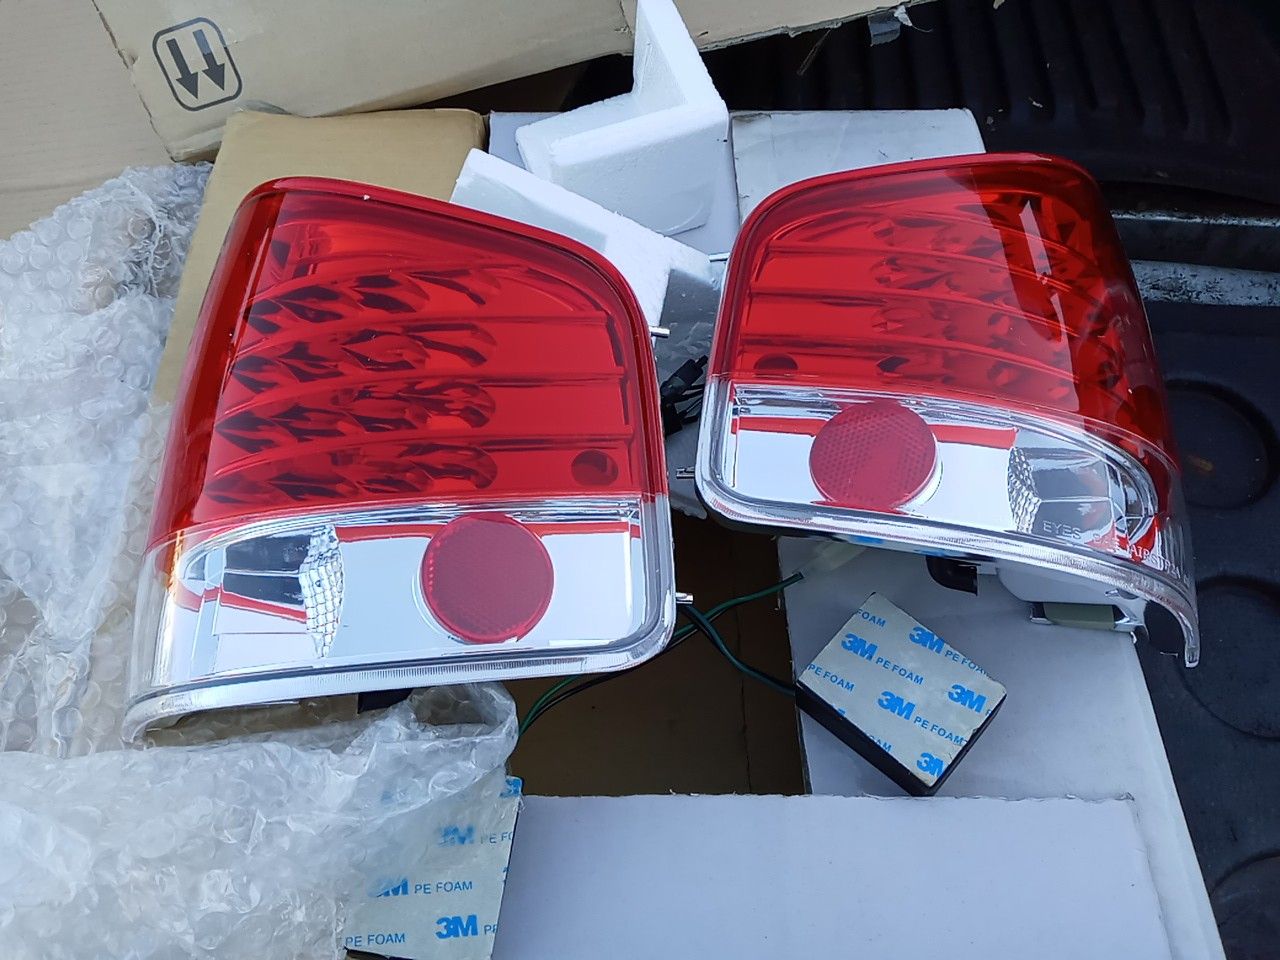 LED Tail lights for a Chevy S10 from 94 to 03